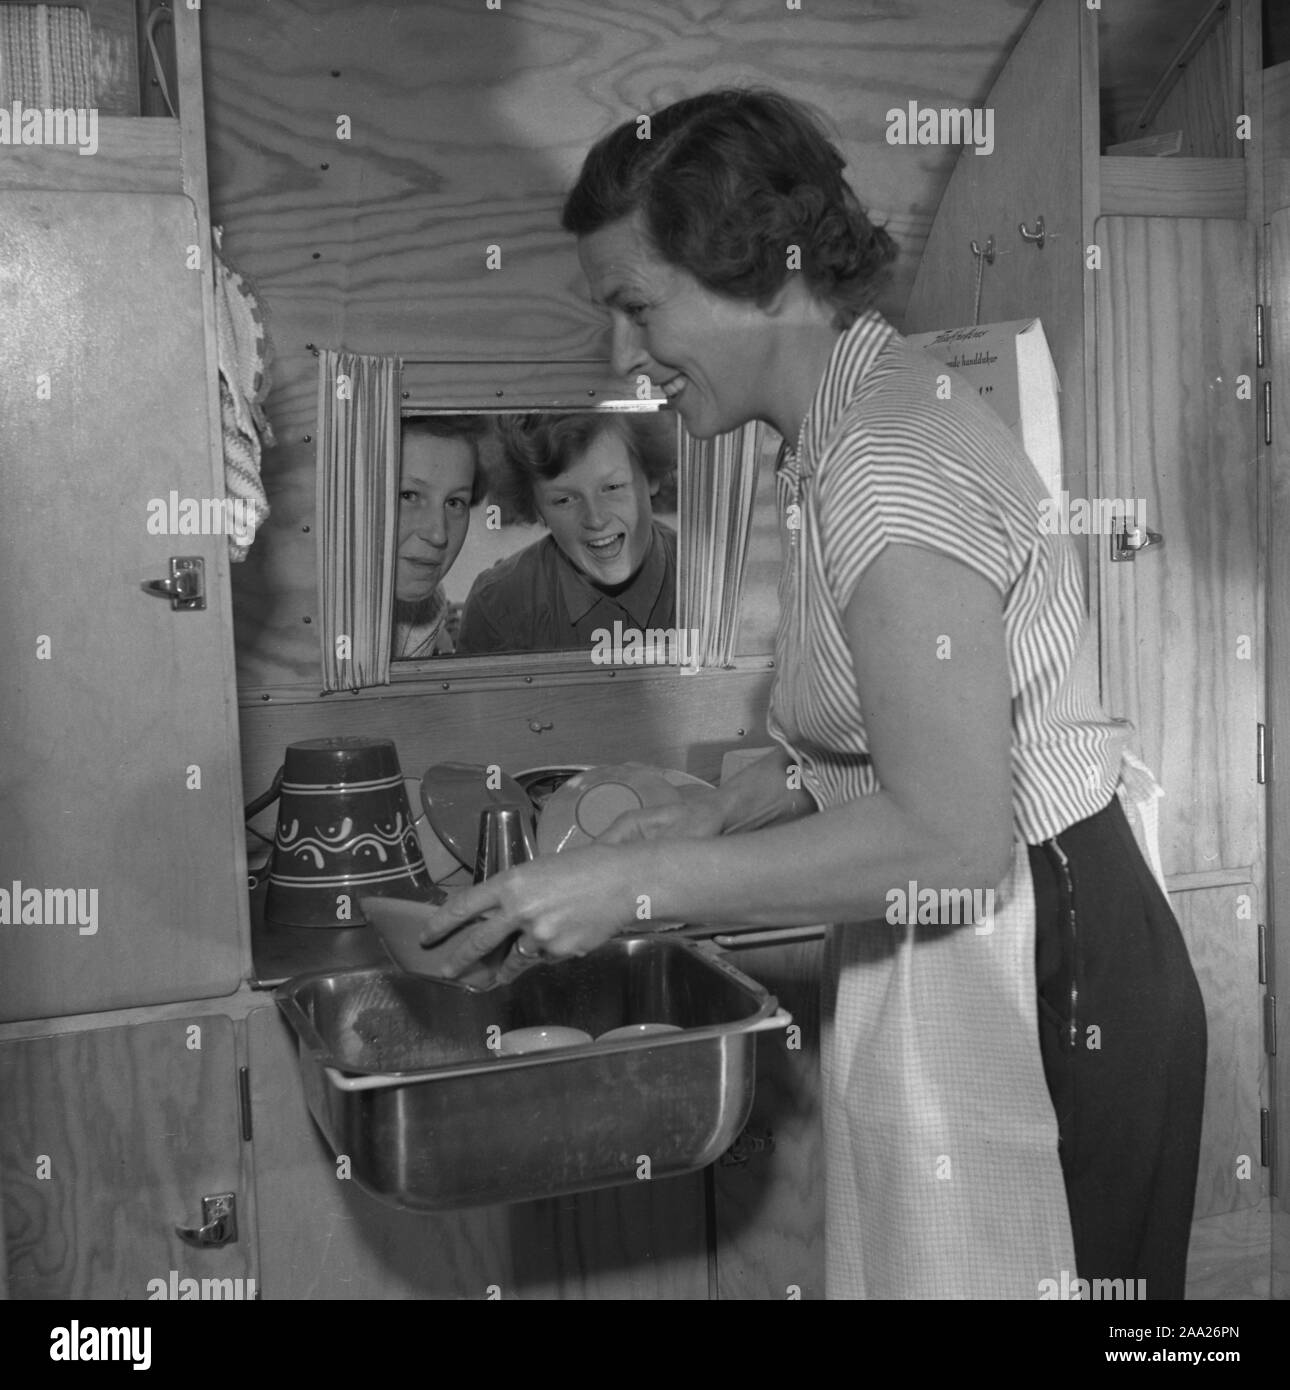 1950s camping. A family is enjoying their holiday and the practial camping life in their caravan. Demonstrating how well everything works for them even on holiday. The mother is doing the dishes in the practical small kitchen sink, with her children cheering on from outside the window. Sweden 1952 Ref 2021 Stock Photo